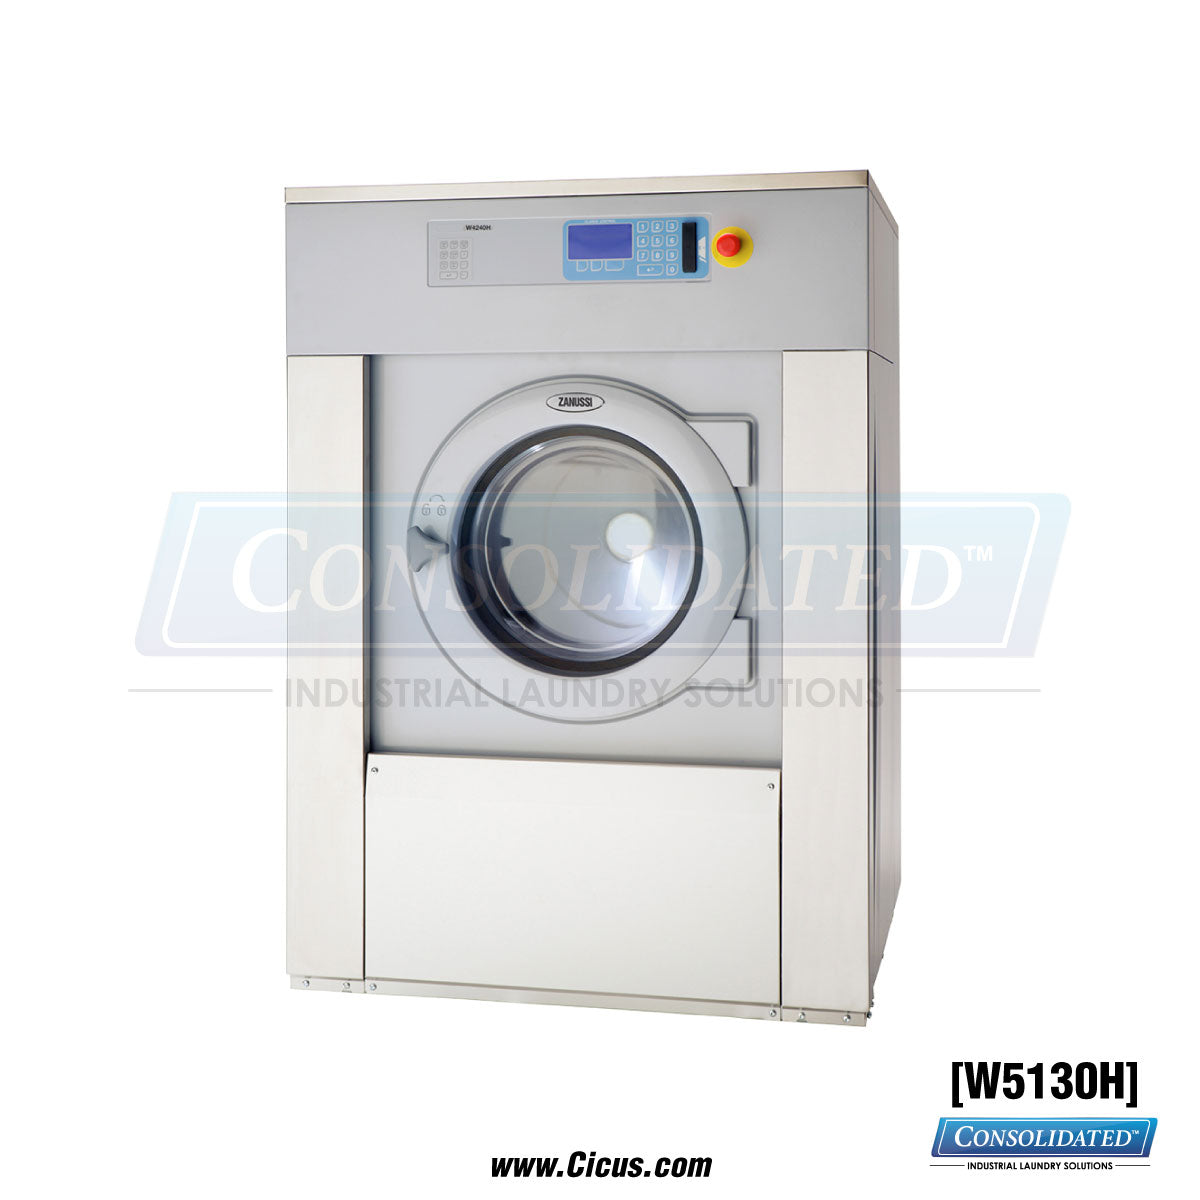 Electrolux G-Force Soft-Mount 30 LB Washer [W5130H]